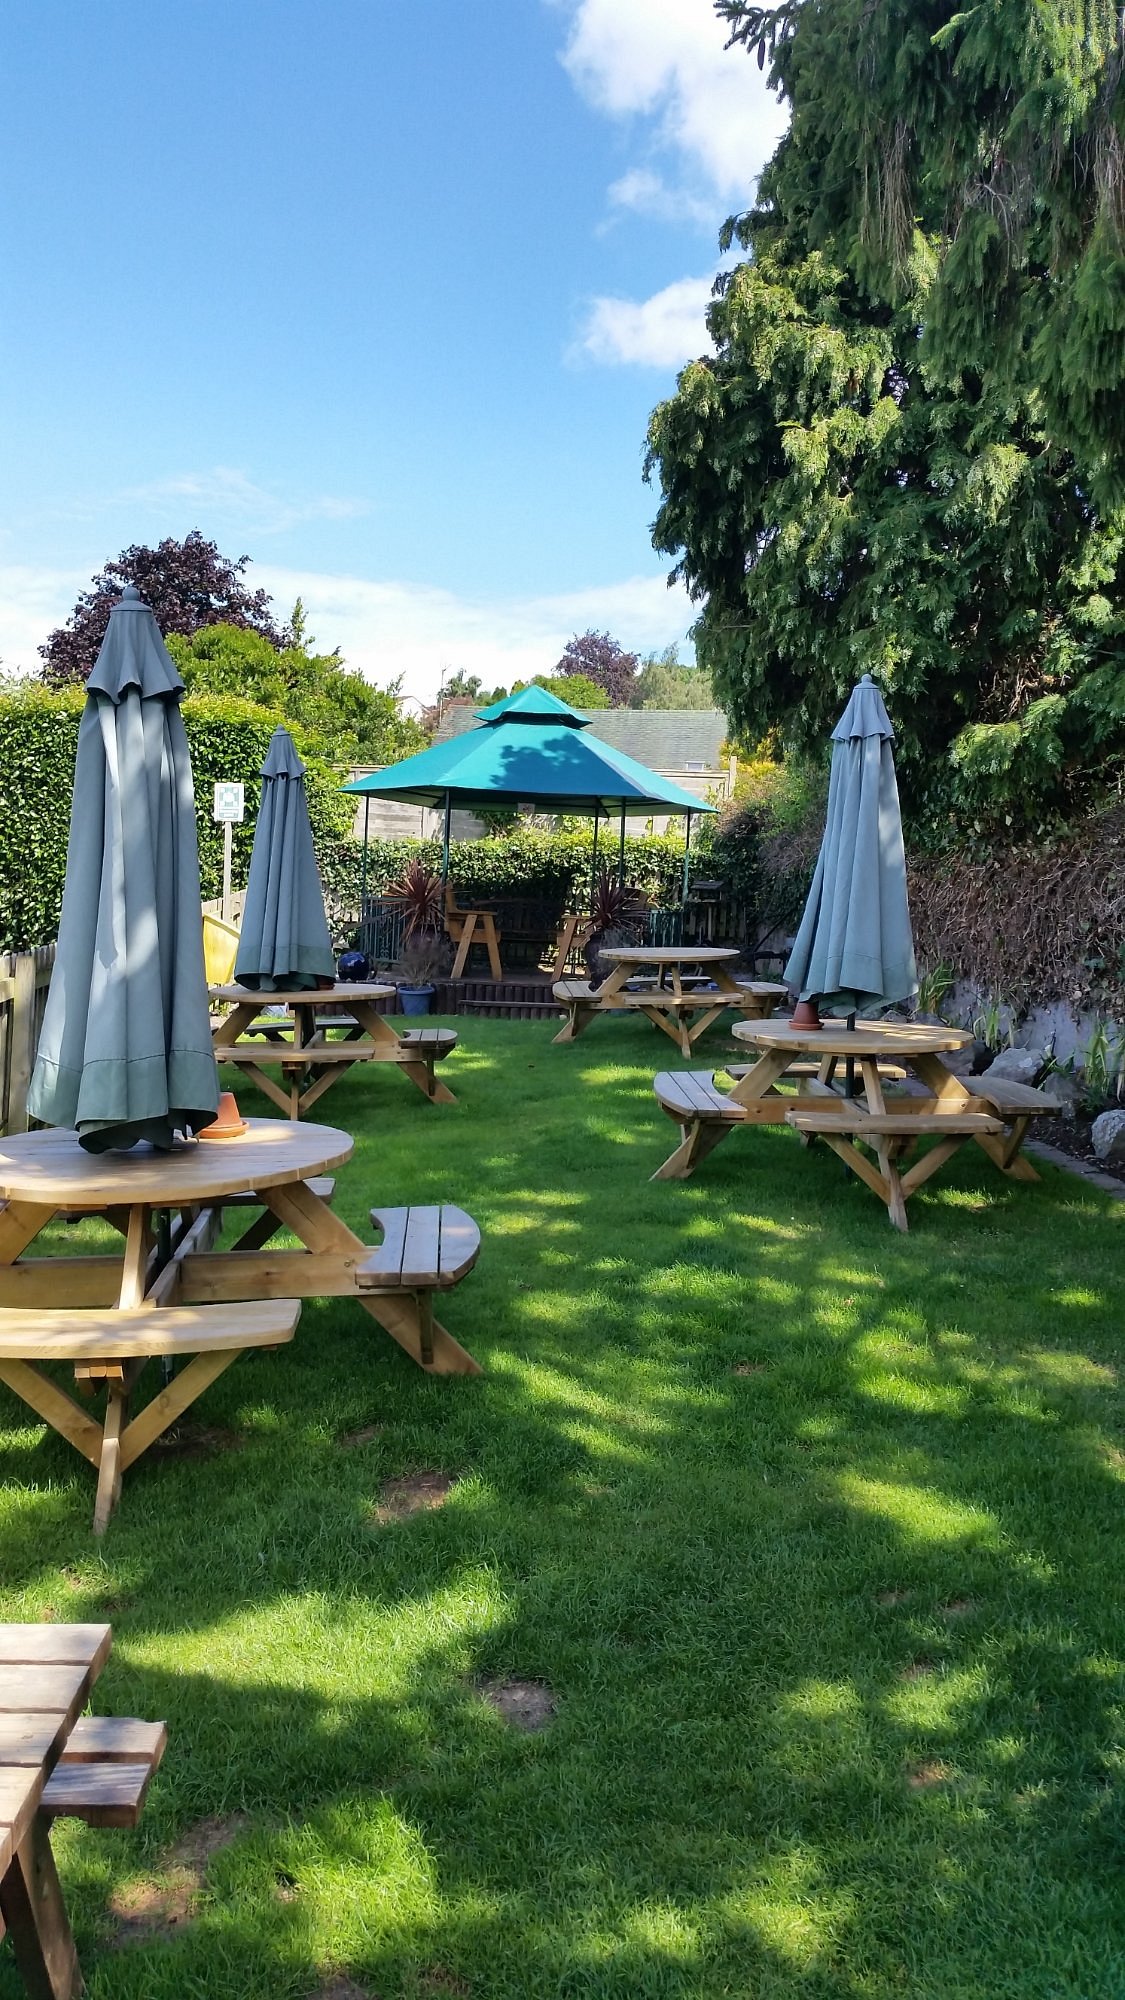 The Cromwell Arms Beer Garden